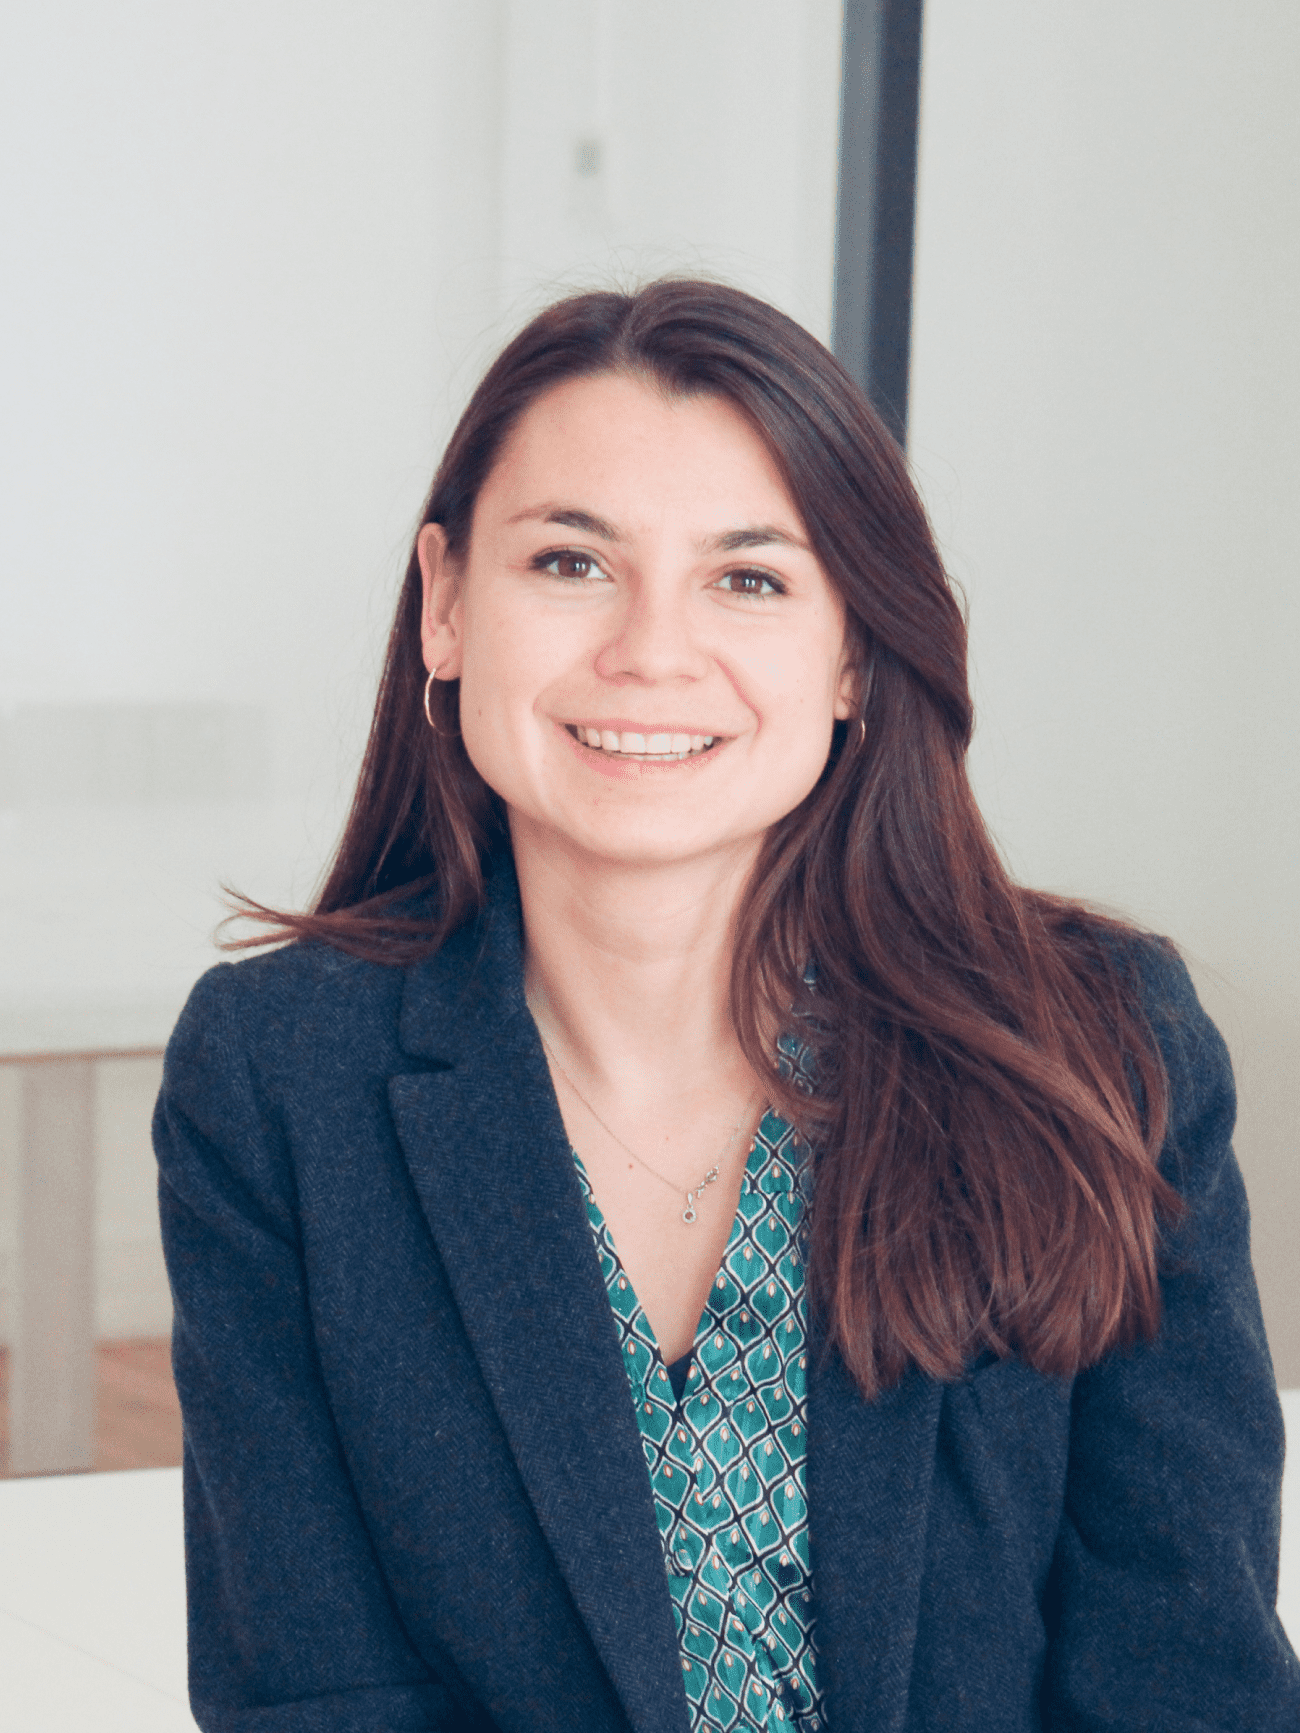 Interview with Julia Ménayas, co-founder of Helios